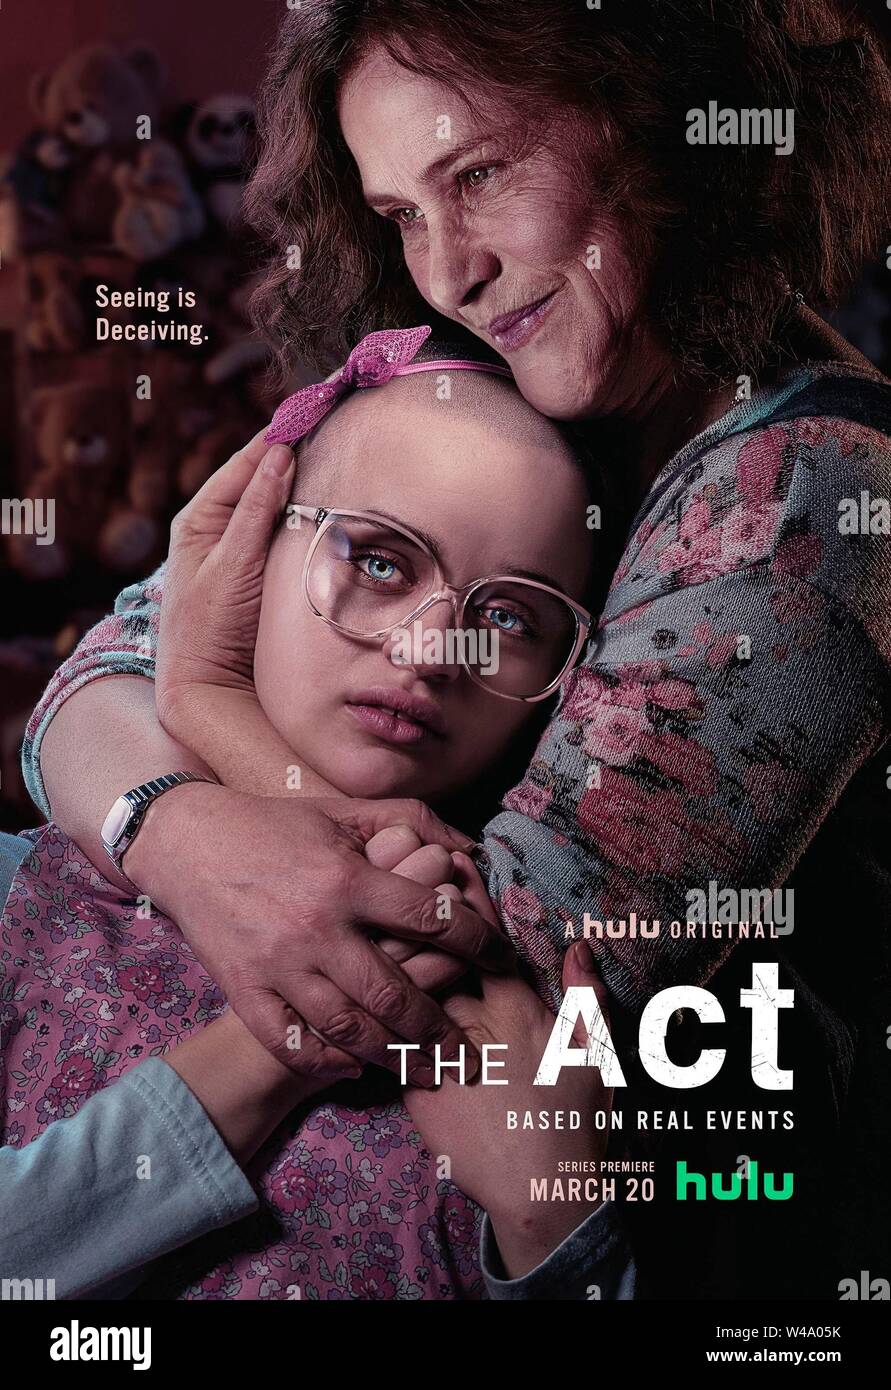 PATRICIA ARQUETTE and JOEY KING in THE ACT (2019), directed by NICK ANTOSCA. Credit: UNIVERSAL CABLE PRODUCTIONS / Album Stock Photo